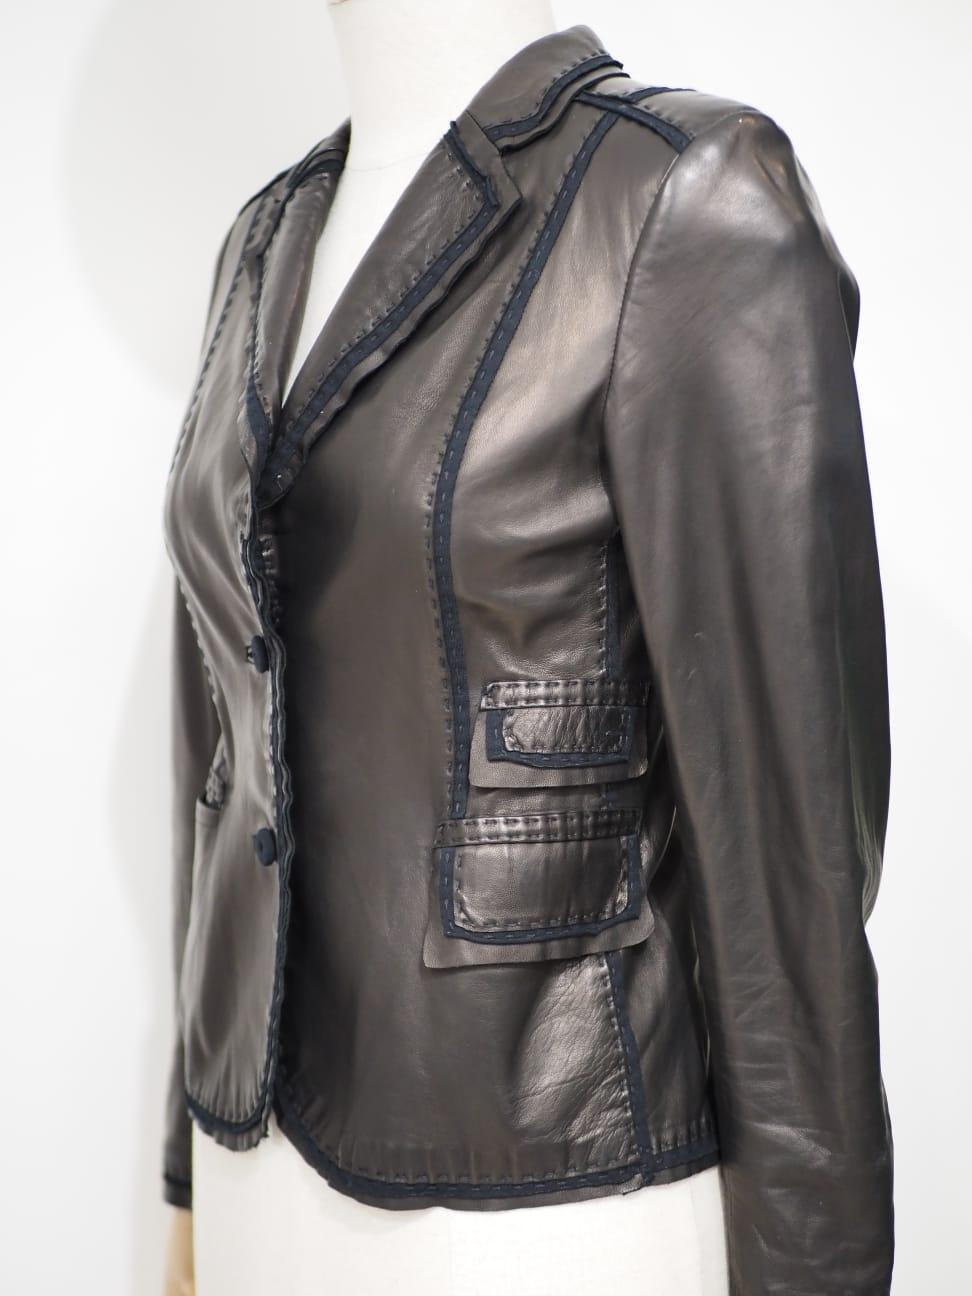 Fendi Black leather jacket totally made in Italy size 38 